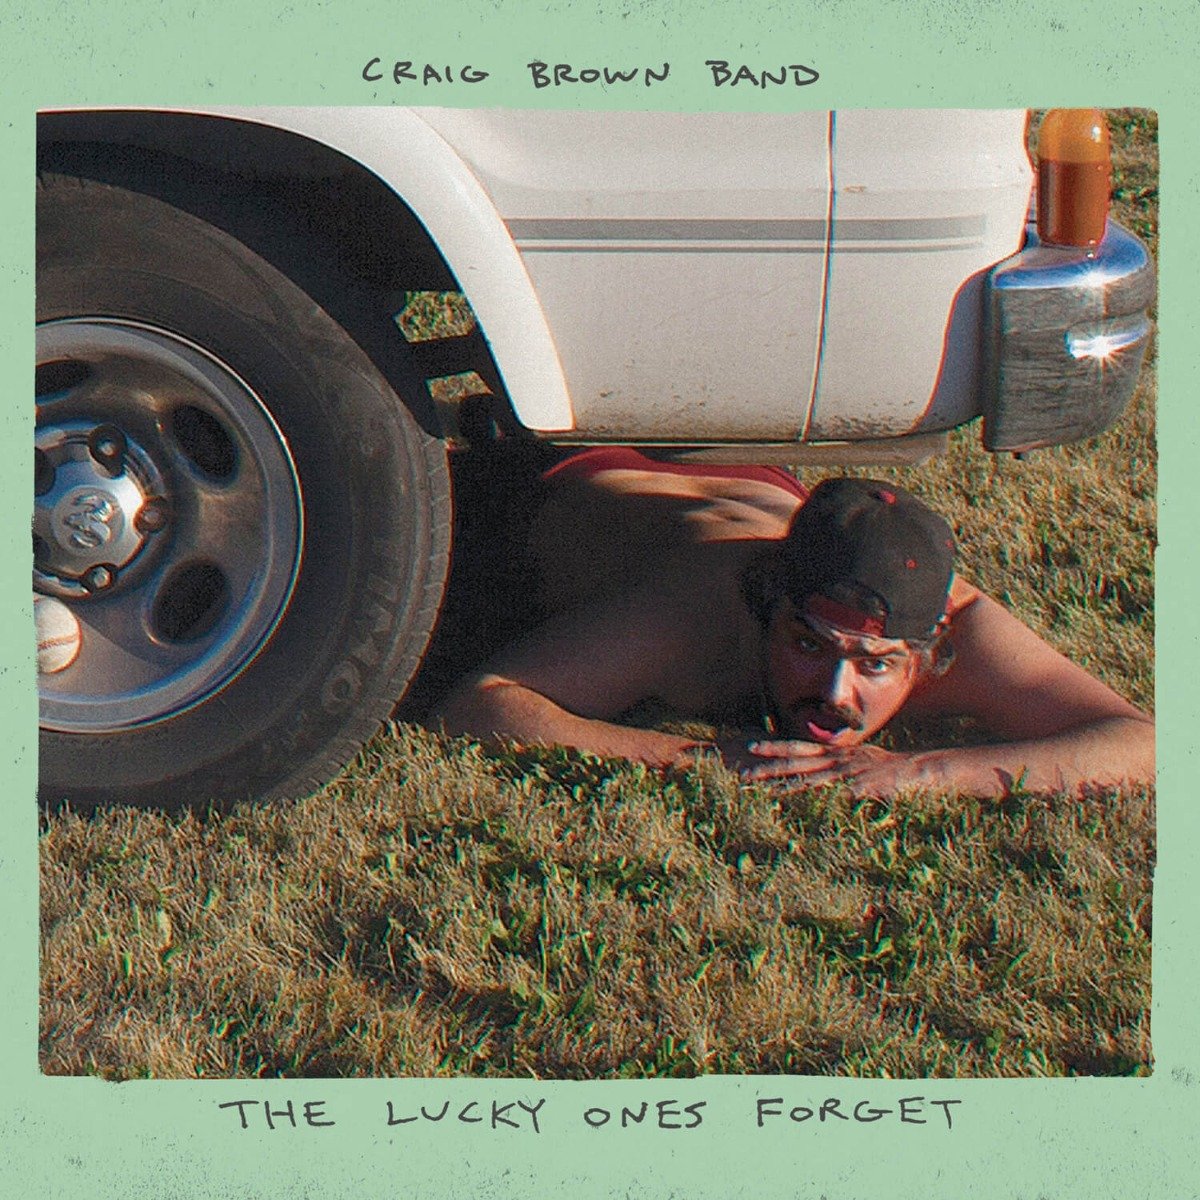 Craig Brown Band - The Lucky Ones Forget (LP)